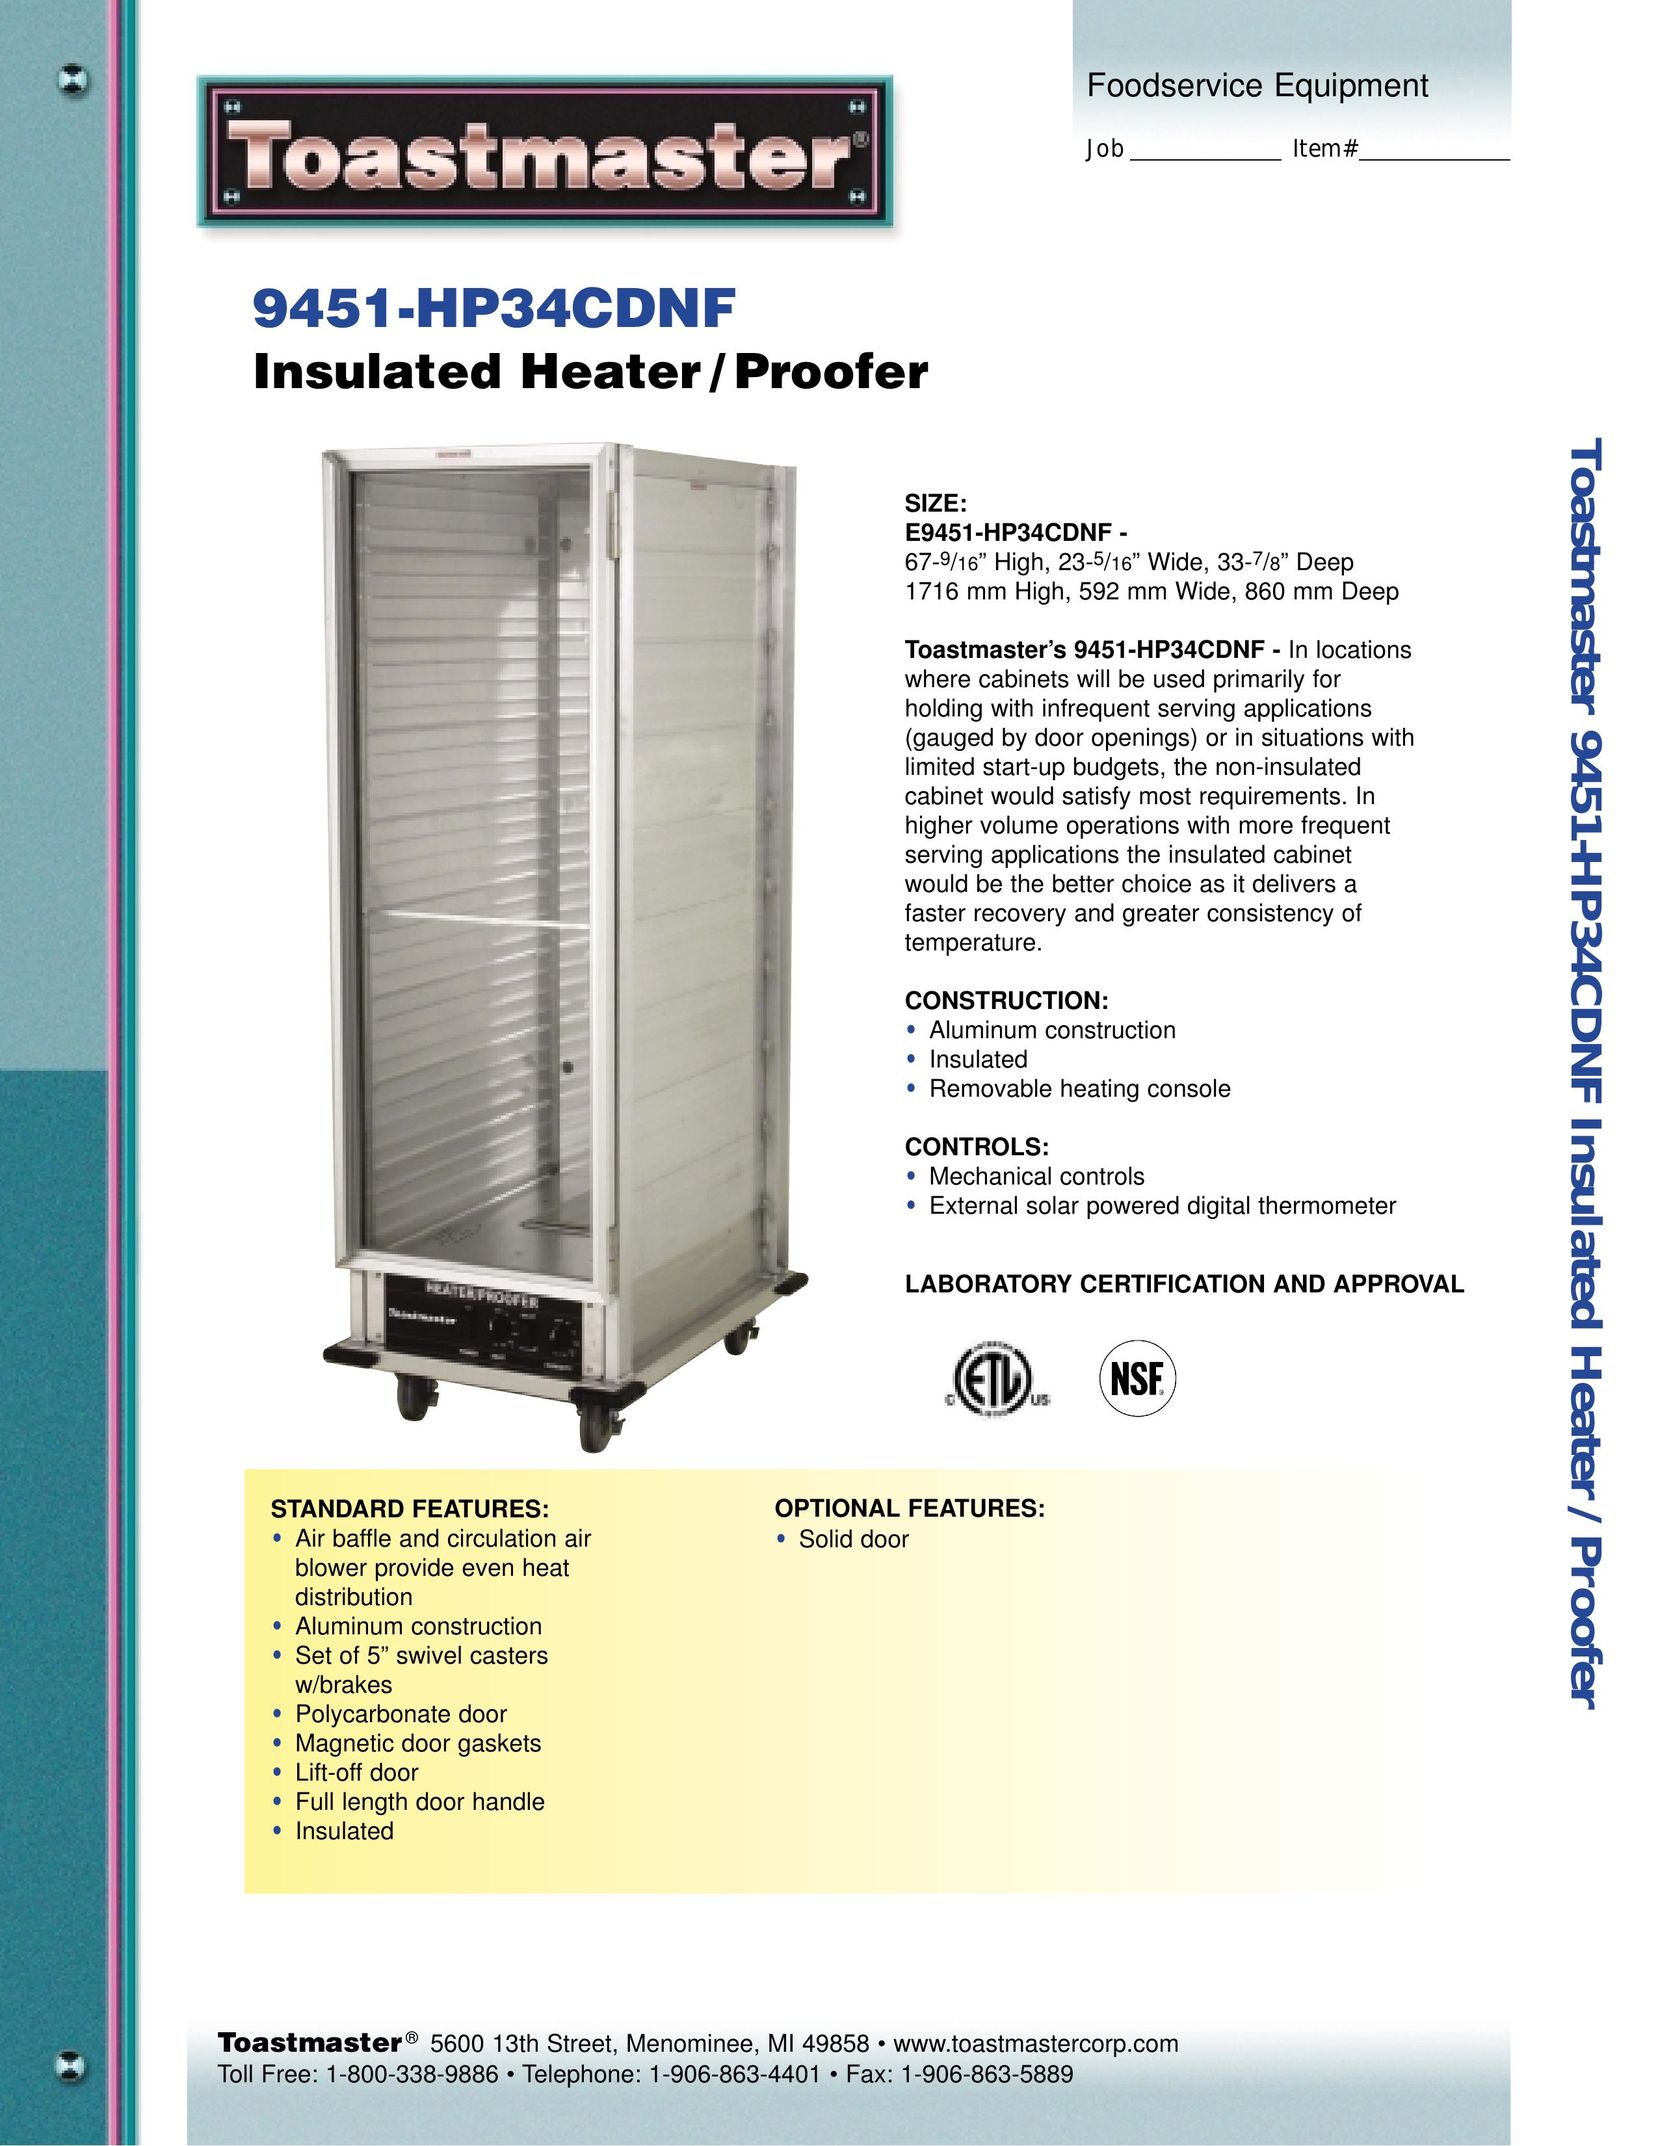 Toastmaster 9451-HP34CDNF Electric Heater User Manual